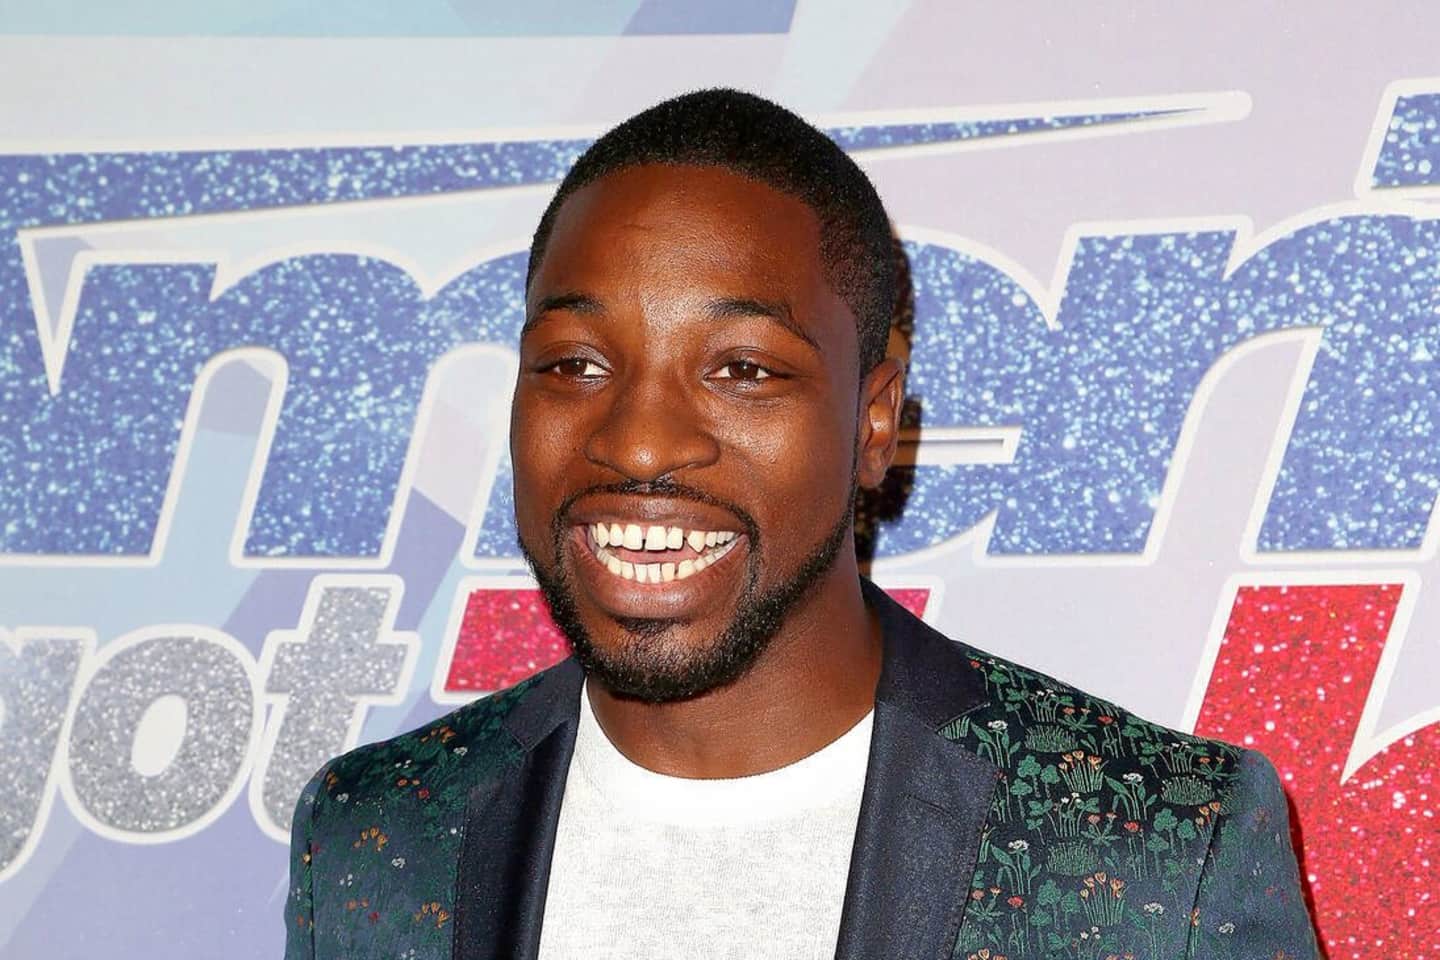 Preacher Lawson Tickets Buy or Sell Tickets for Preacher Lawson Tour